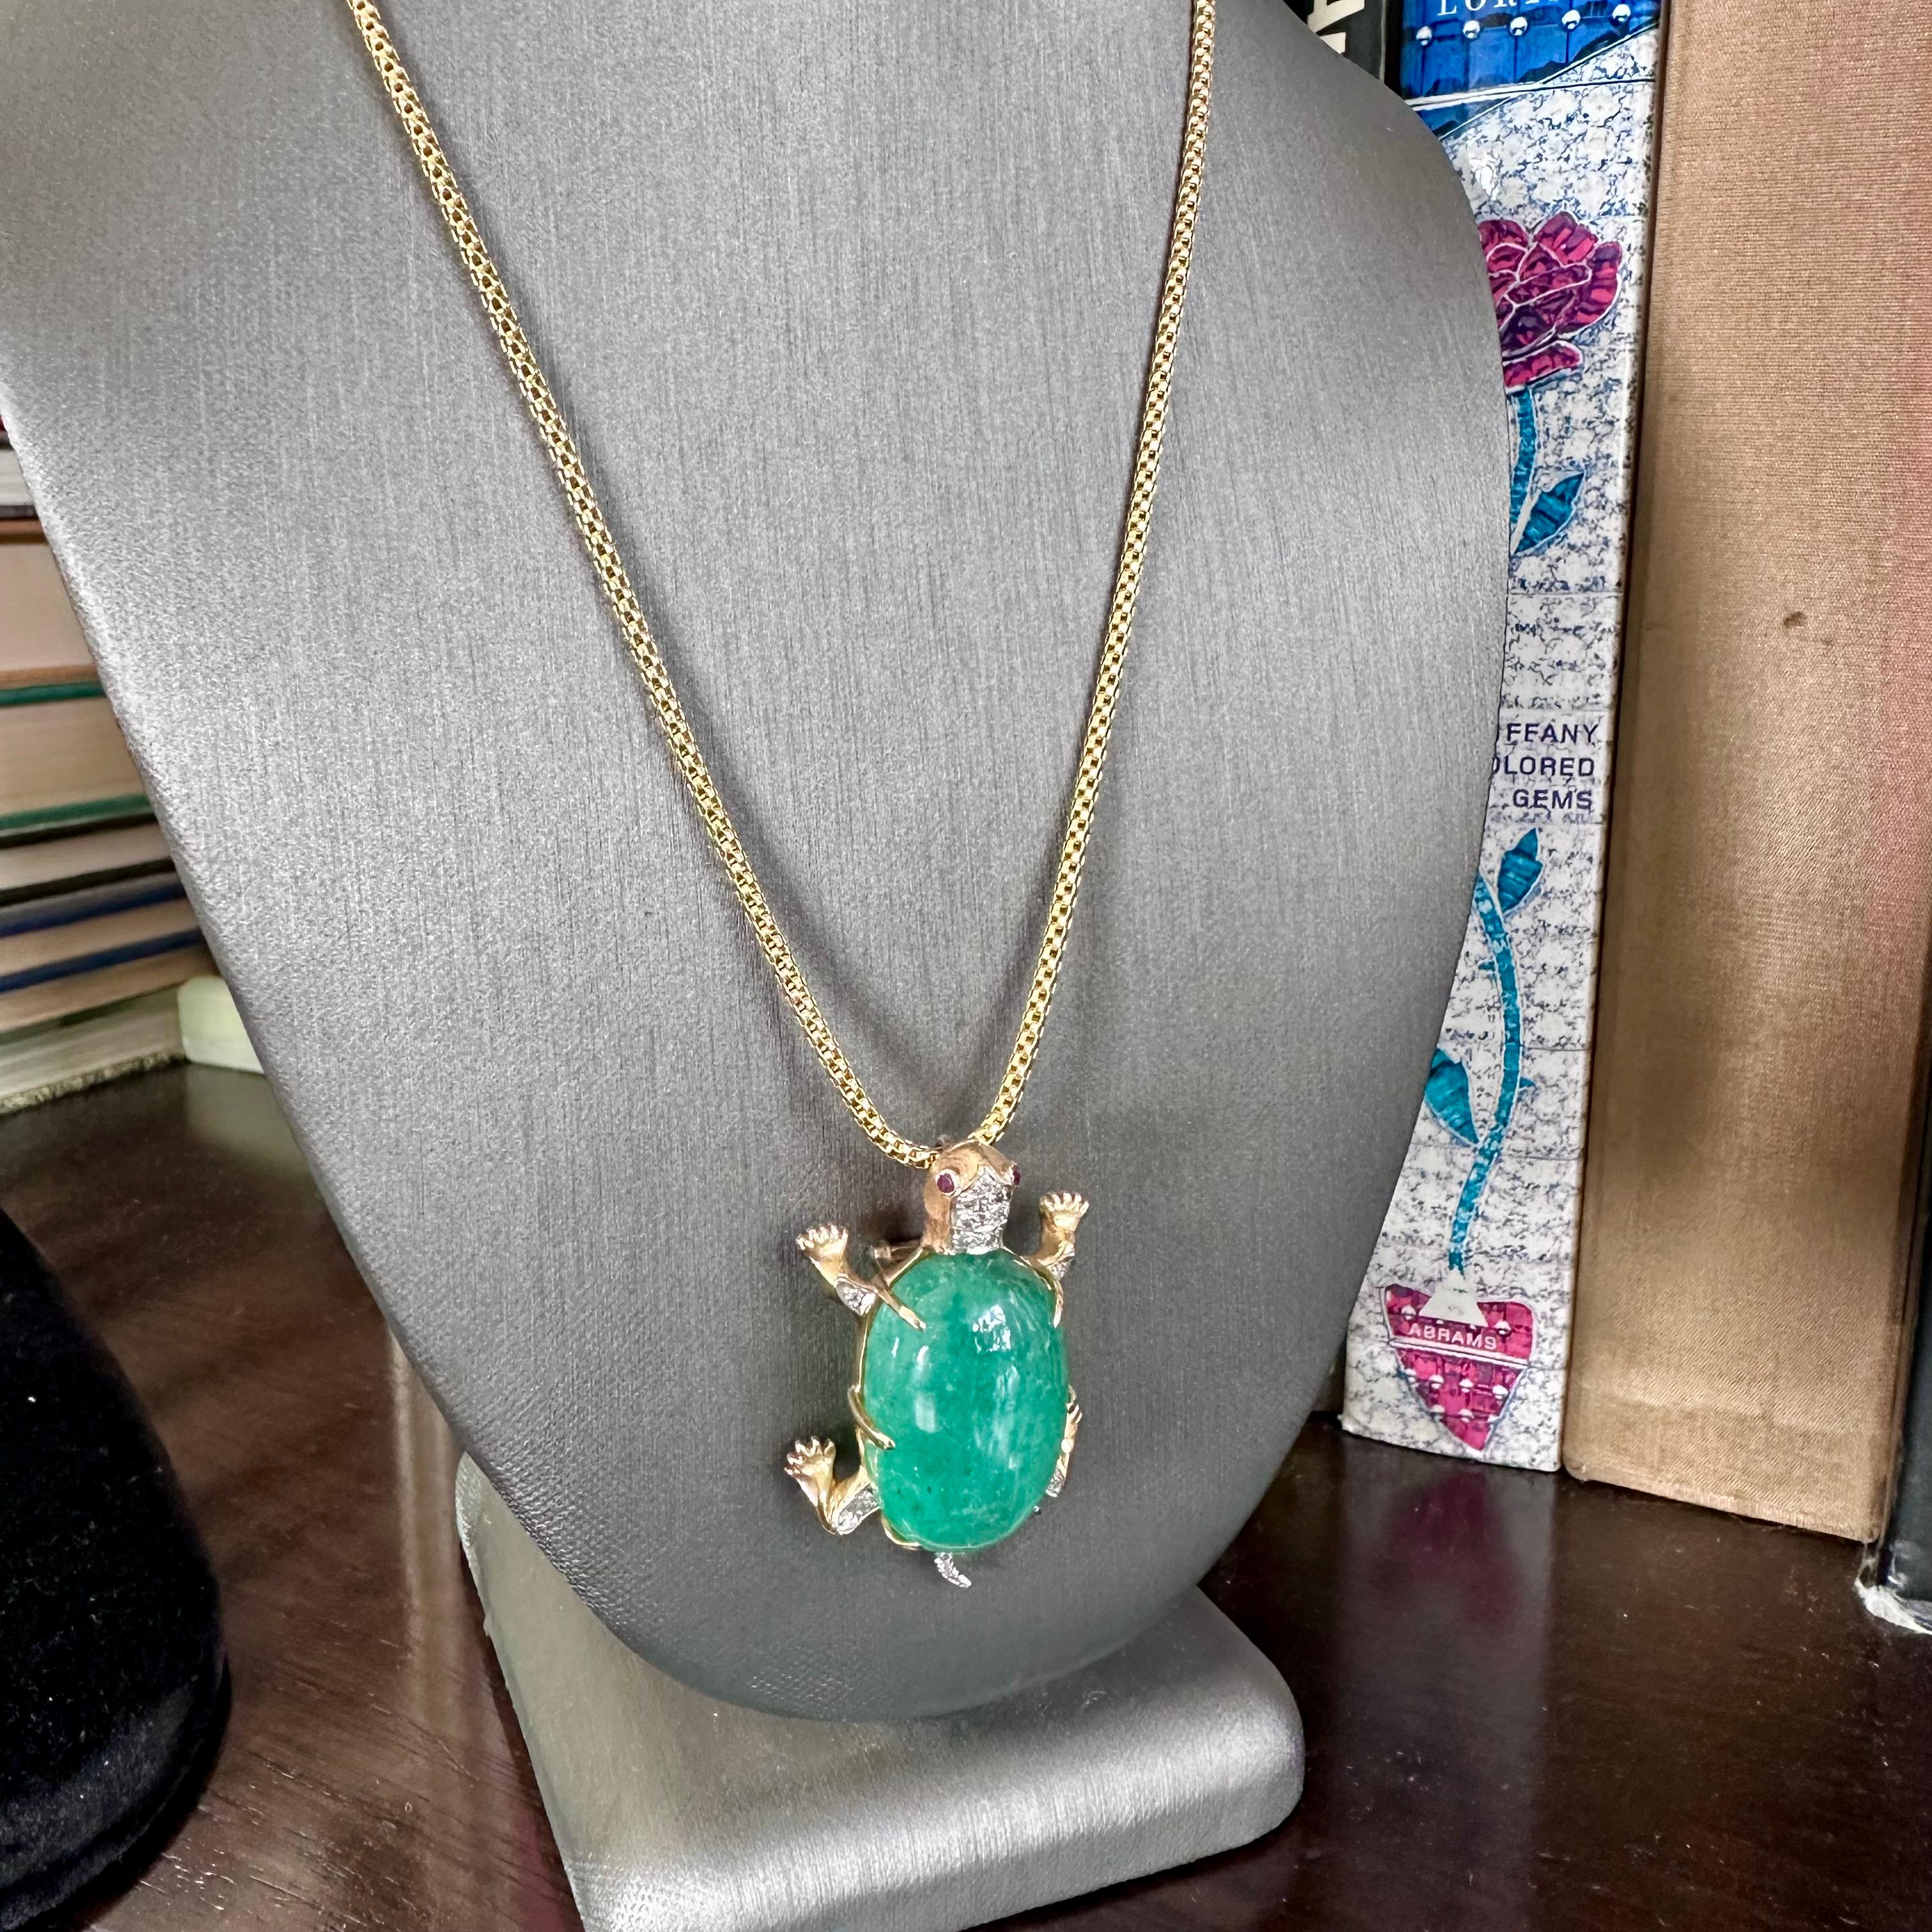 1950's Large 14k Turtle With A Massive 50 ct Cabochon Green Emerald 
Cabochon Emerald 
Dimensions: 30 mm 18mm 13.1 mm     EST 50 CTS
The body of the turtle is set with diamonds on each leg and his tail. The diamonds are set in either white gold or